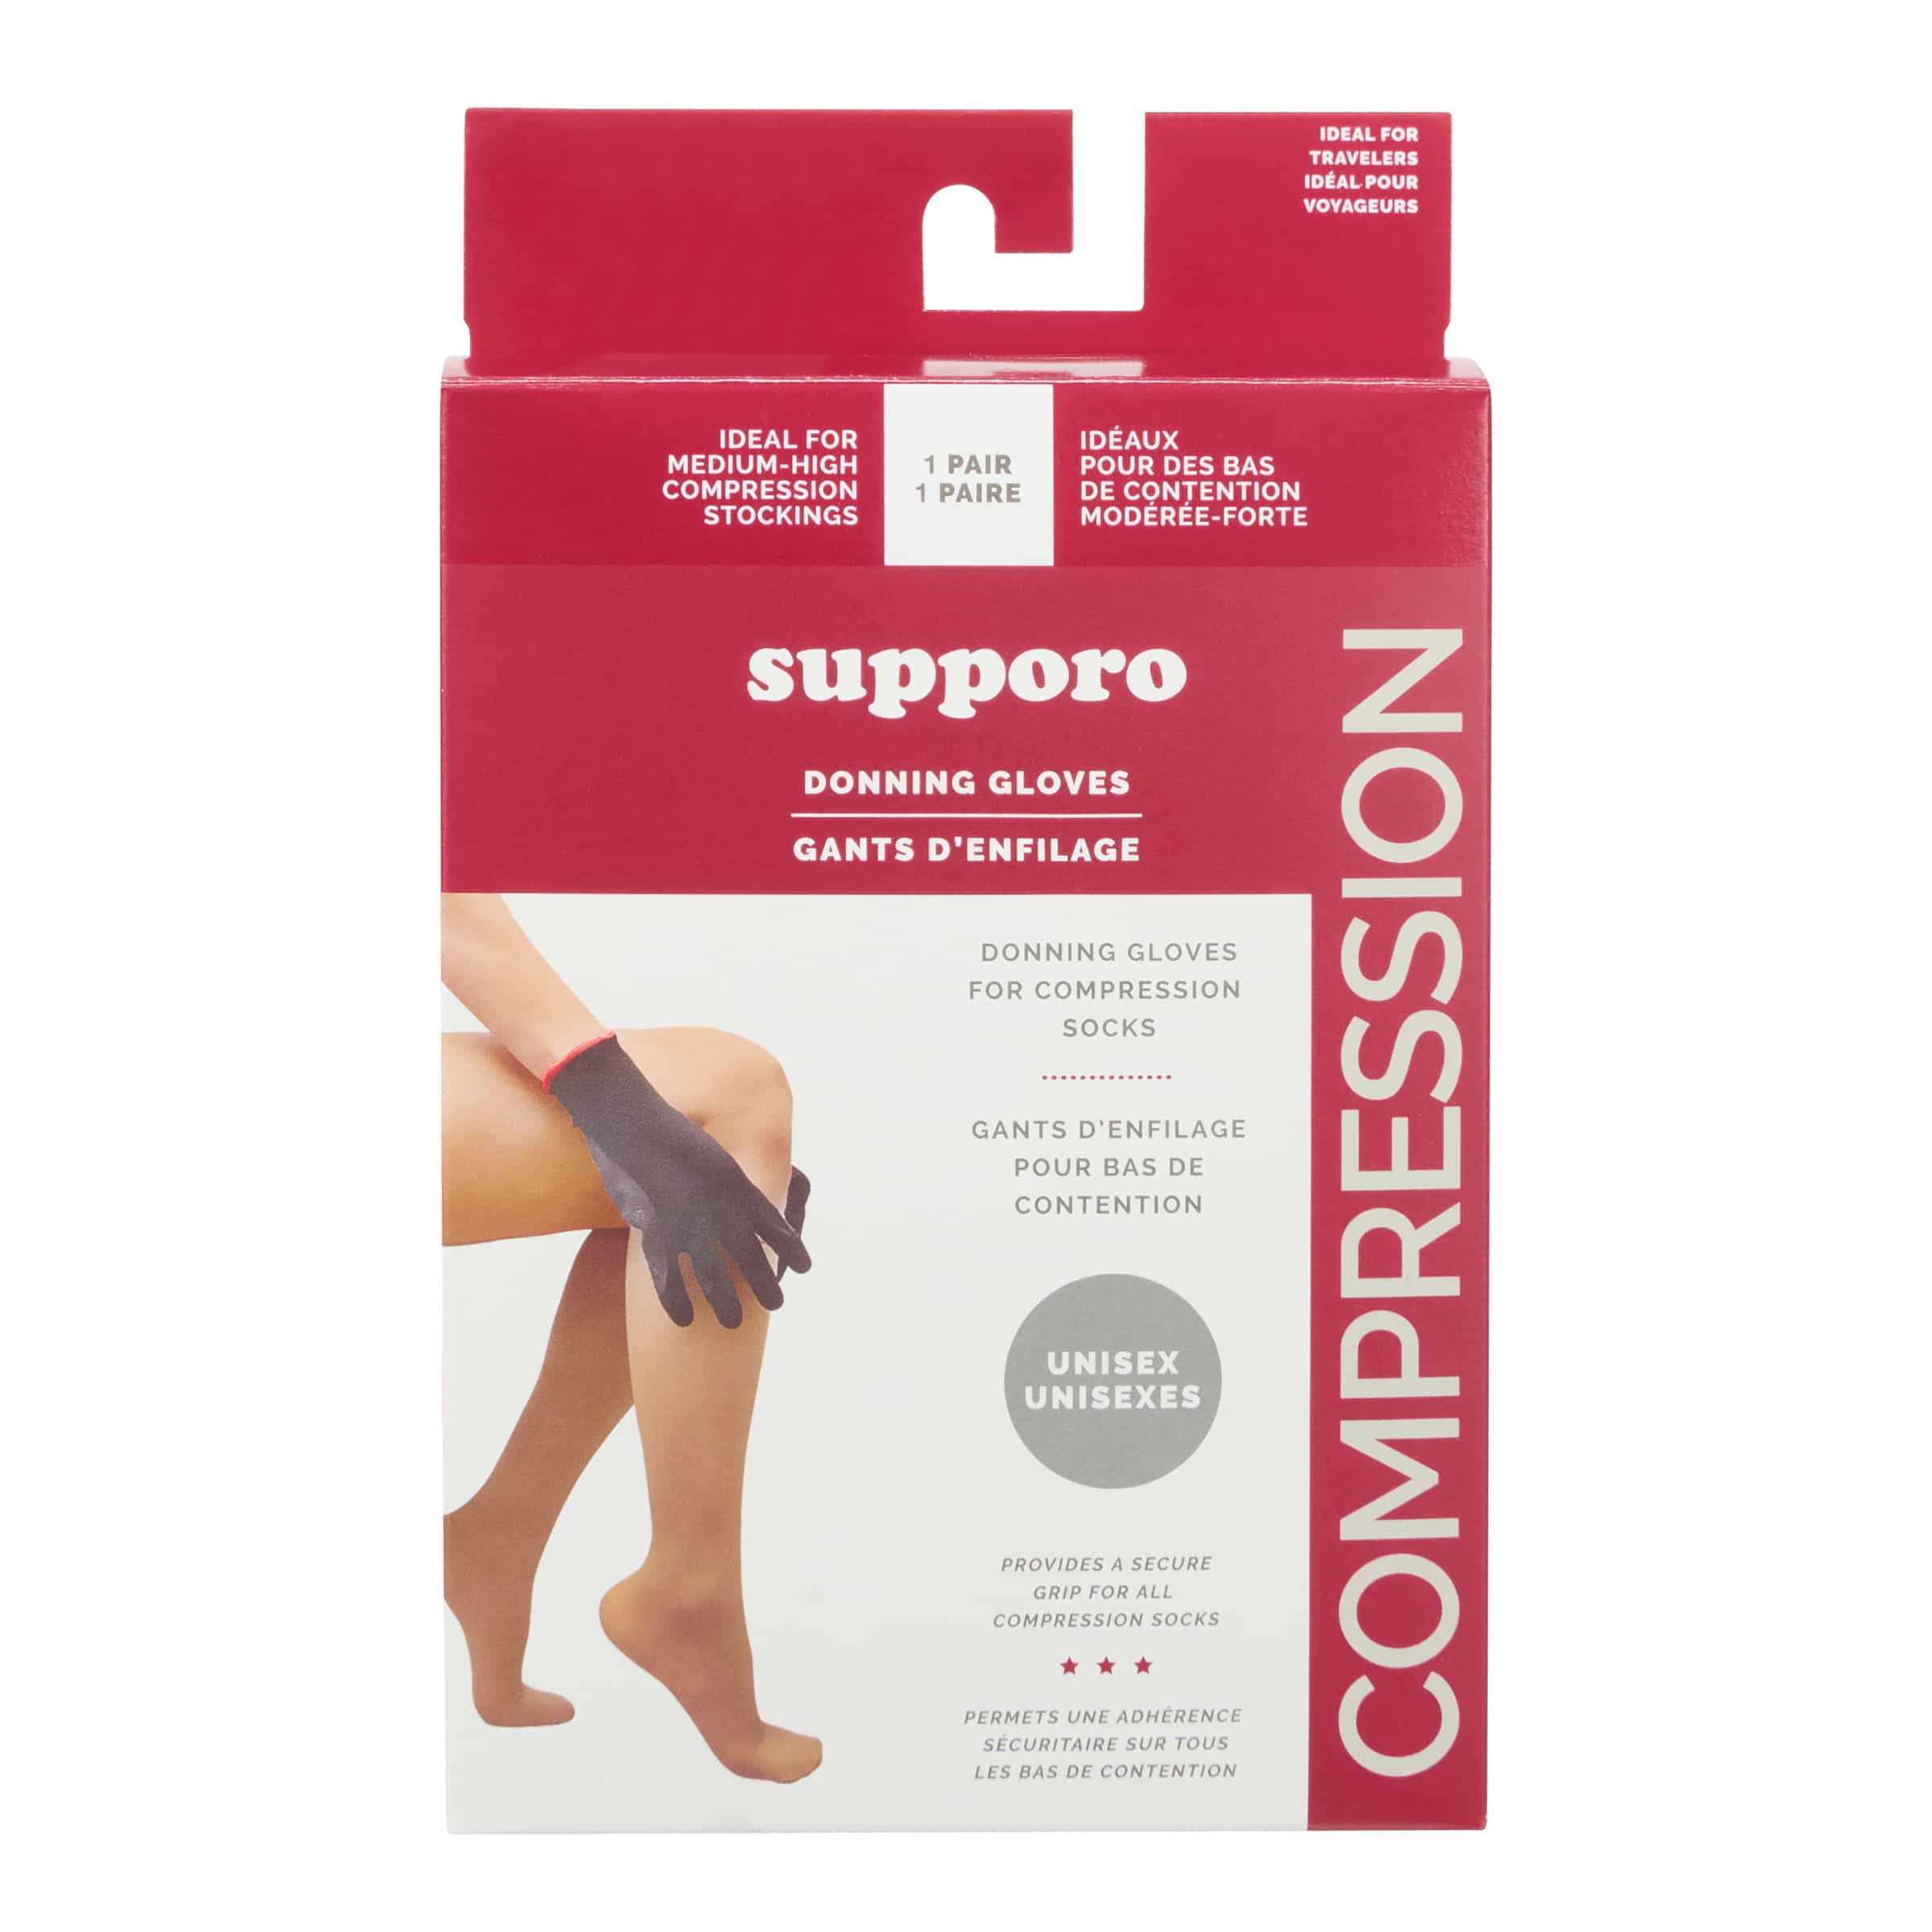 Supporo Donning Gloves for Compression Socks